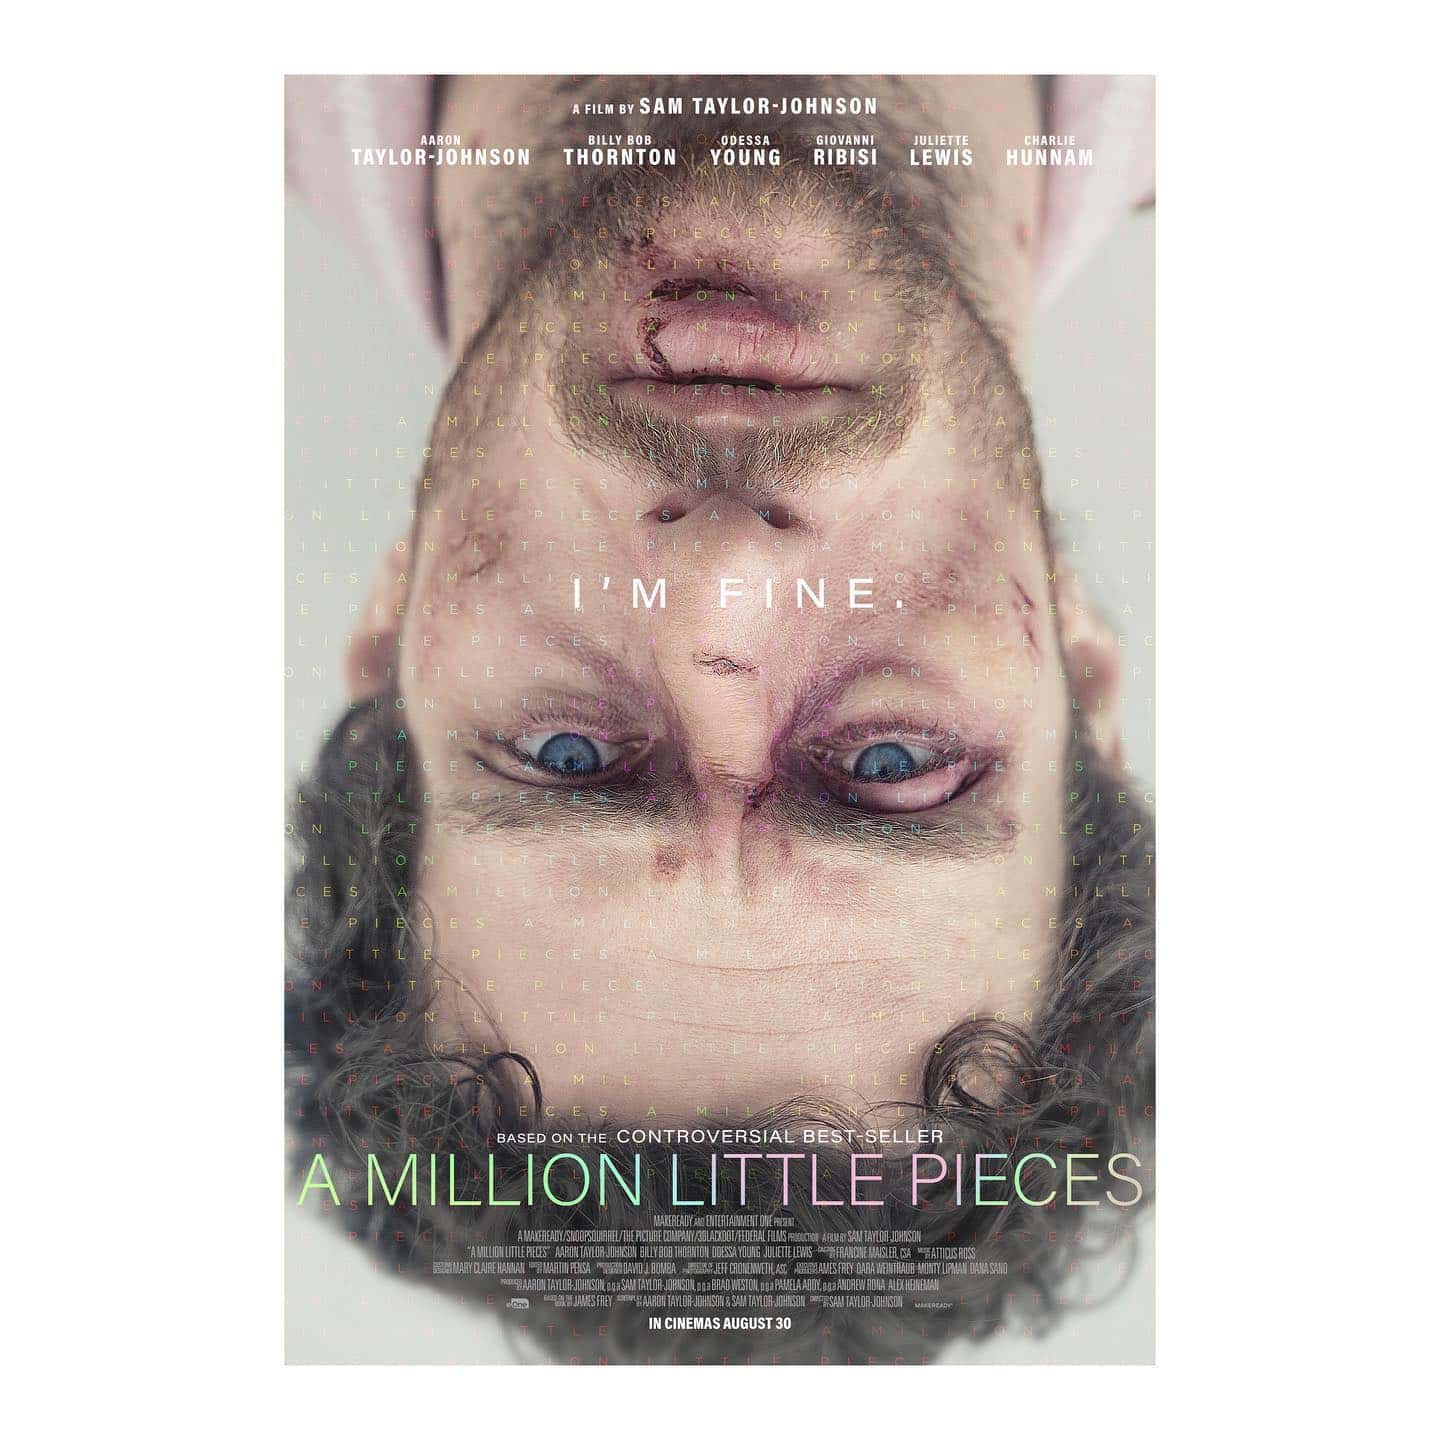 See @samtaylorjohnson ’s A MILLION LITTLE PIECES in UK cinemas on 30th August 
.
.
.
.
.
.